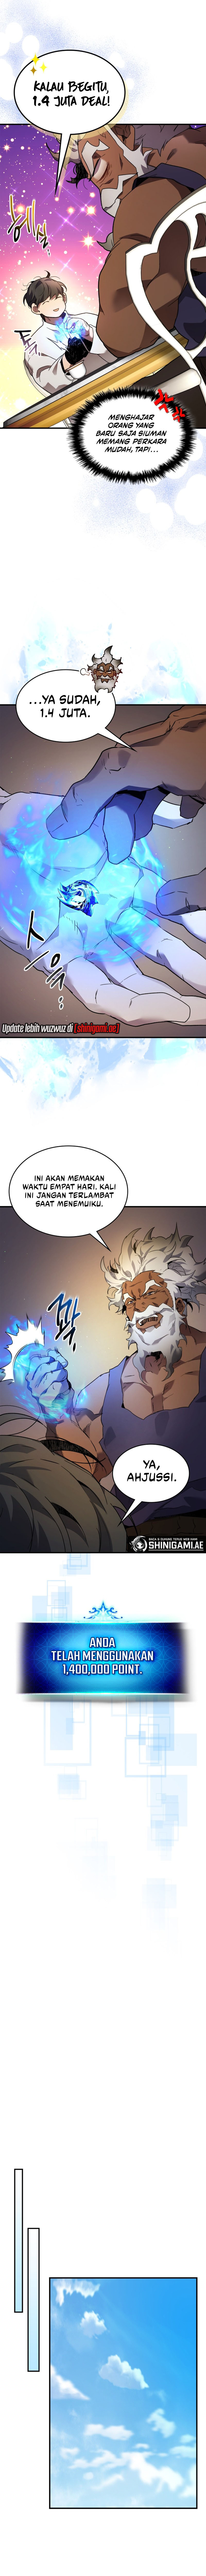 leveling-with-the-gods-indo Chapter 94